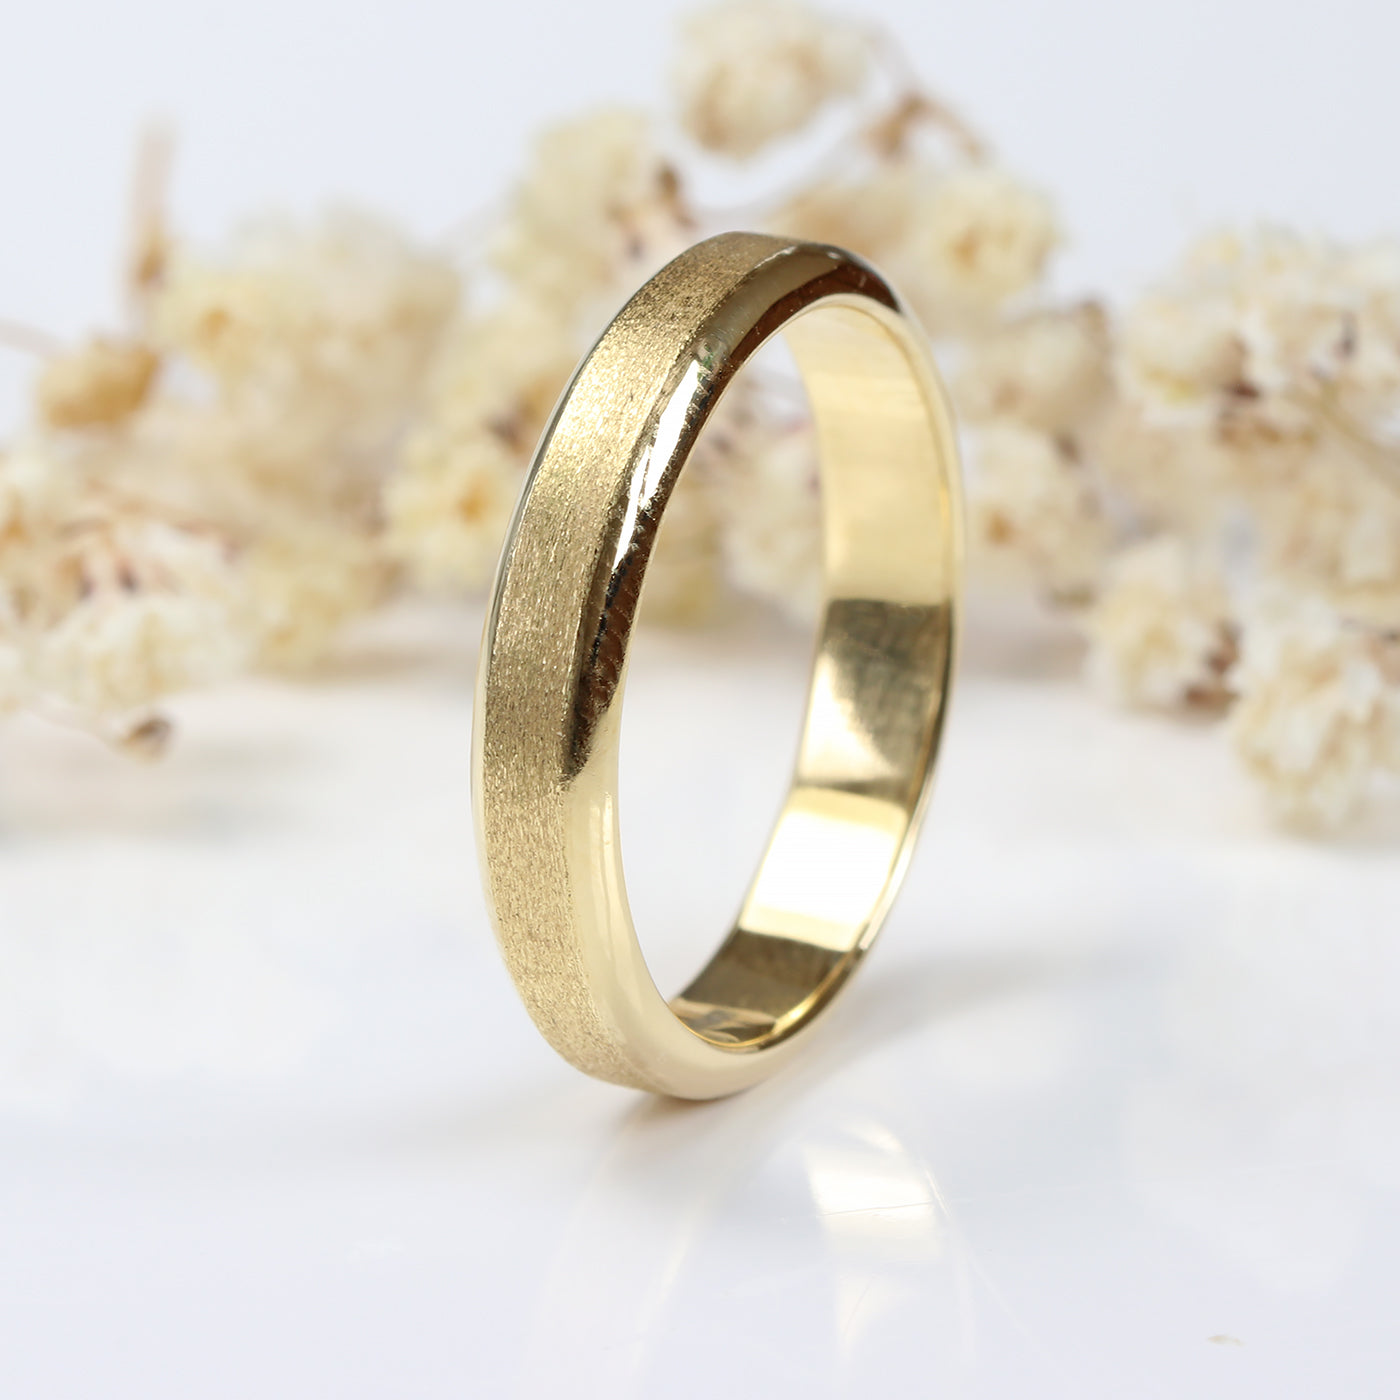 4mm Bevel Edged Wedding Ring in 18ct Yellow Gold – Size Q 1/2 (Resize G – R)